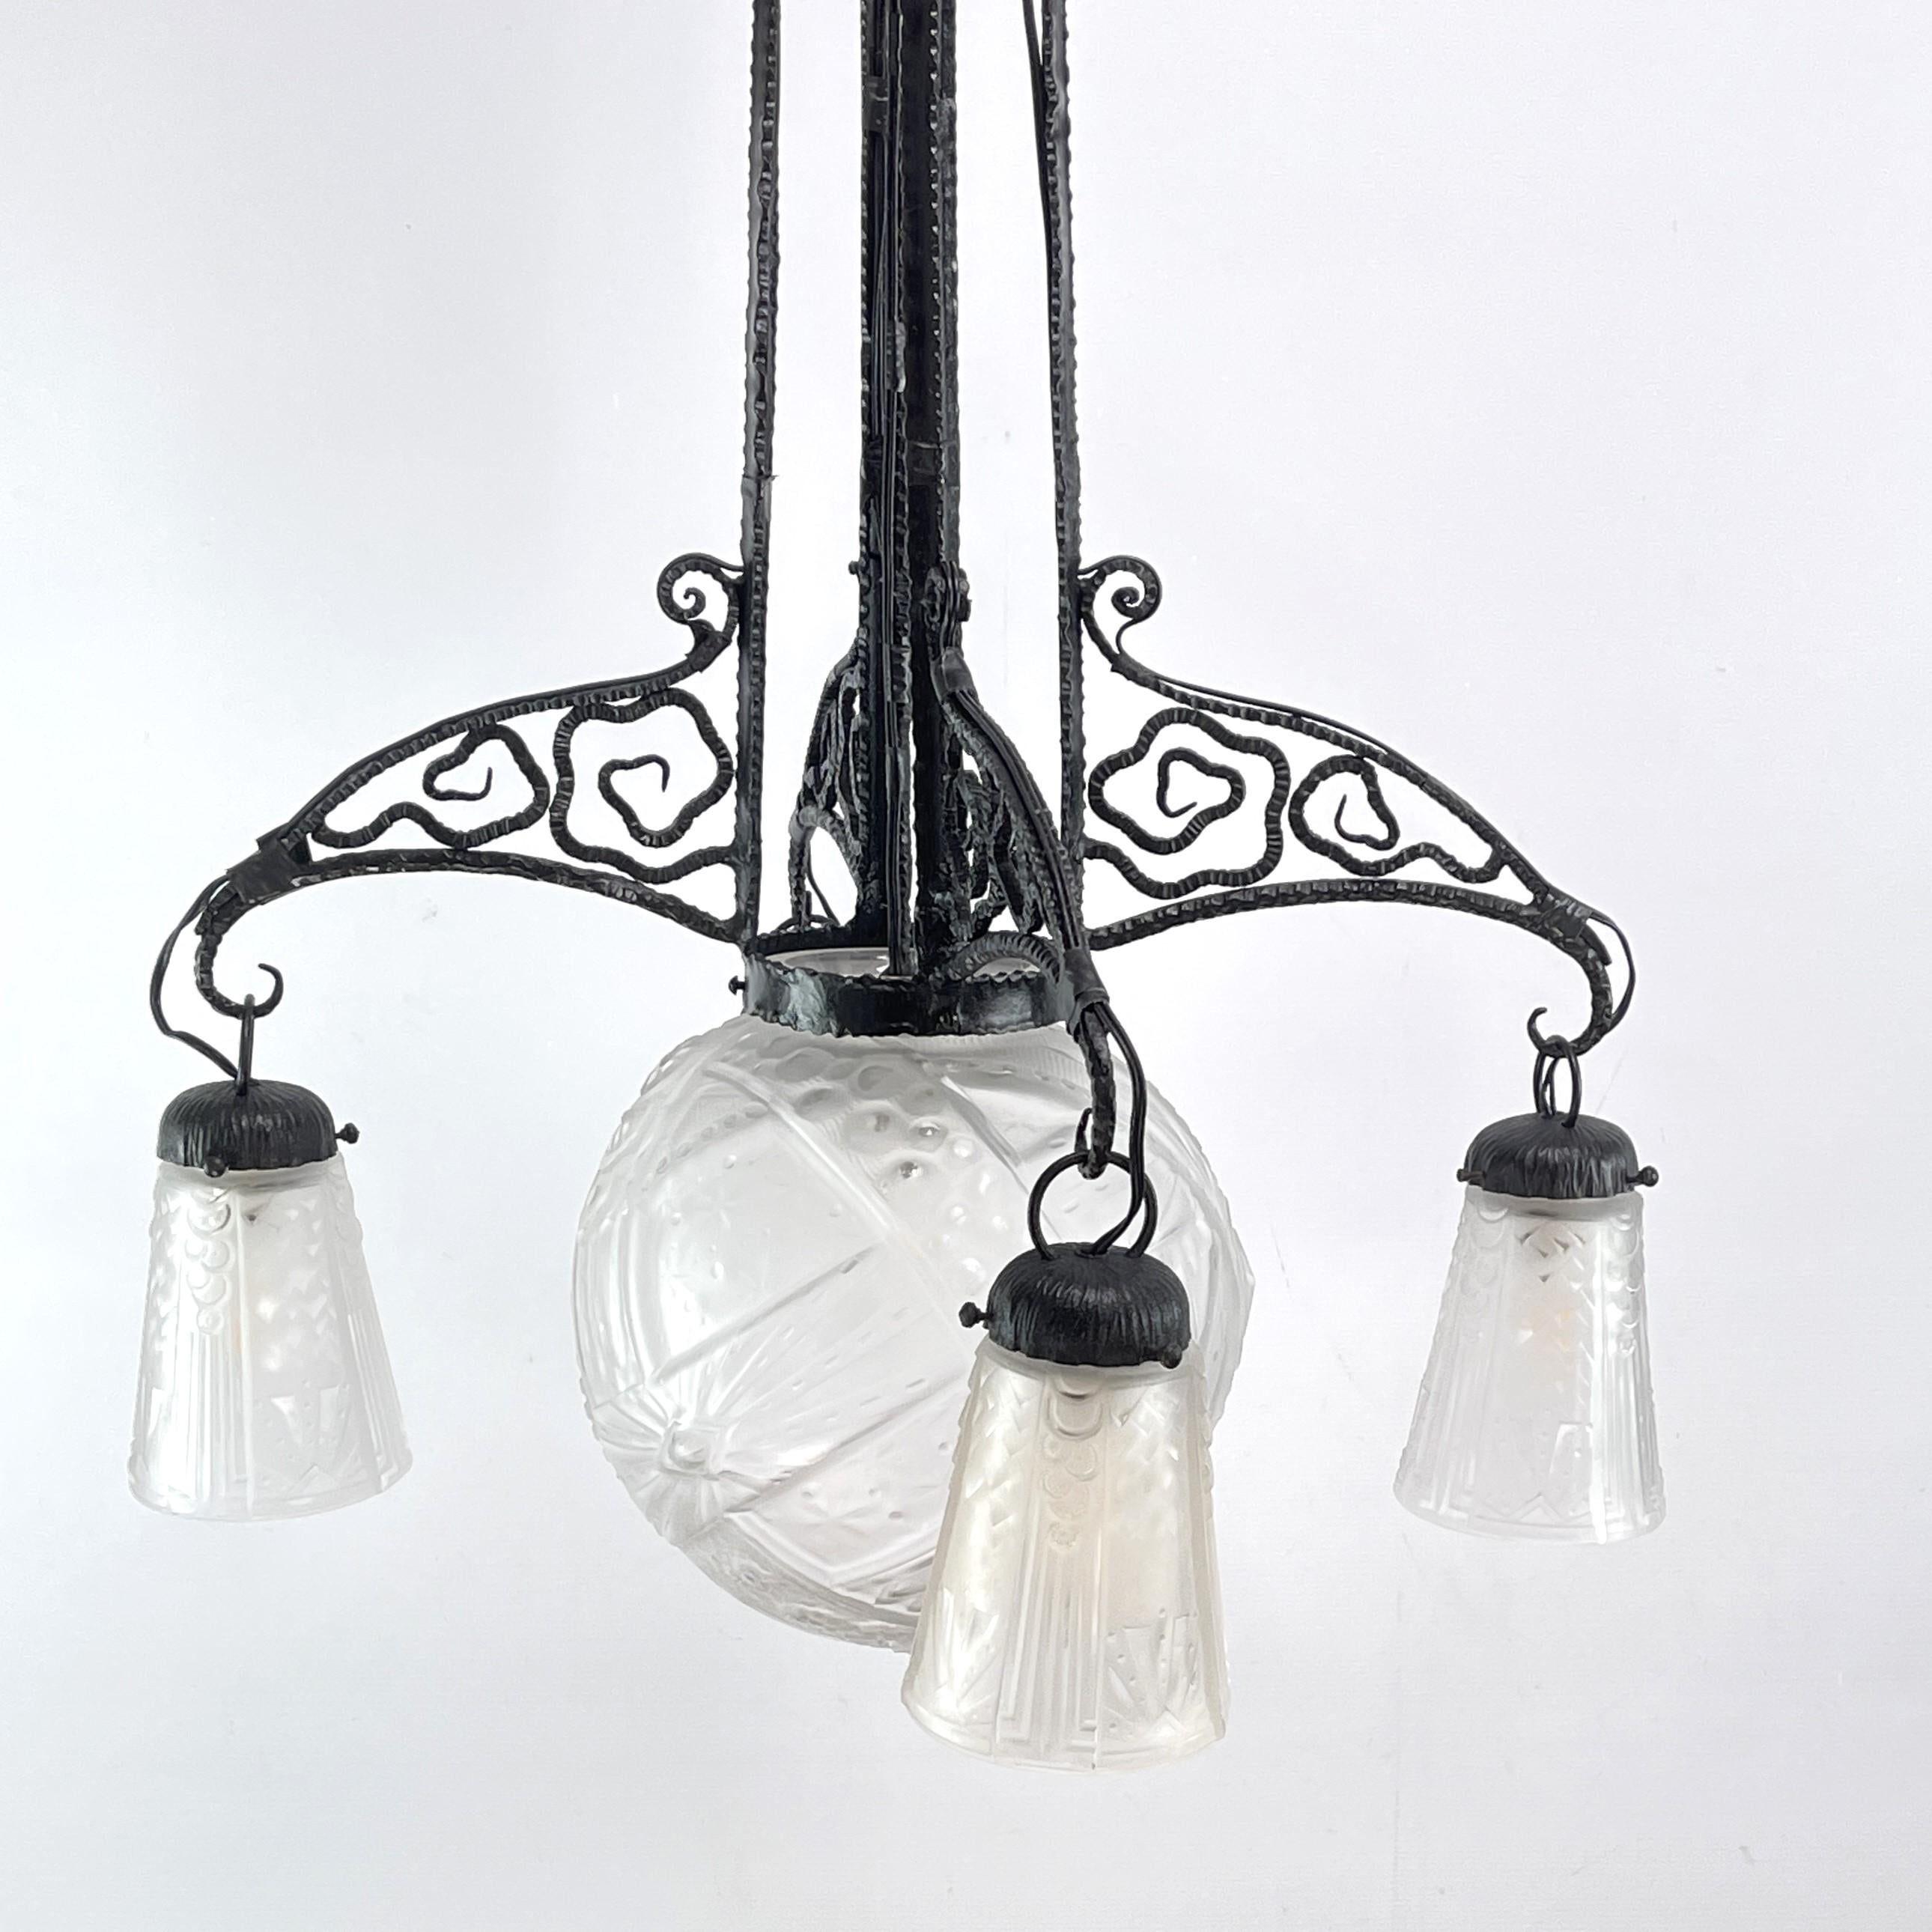 Mid-20th Century Art Deco wrought iron Ceiling Lamp by Muller Freres, Luneville, 1930s For Sale